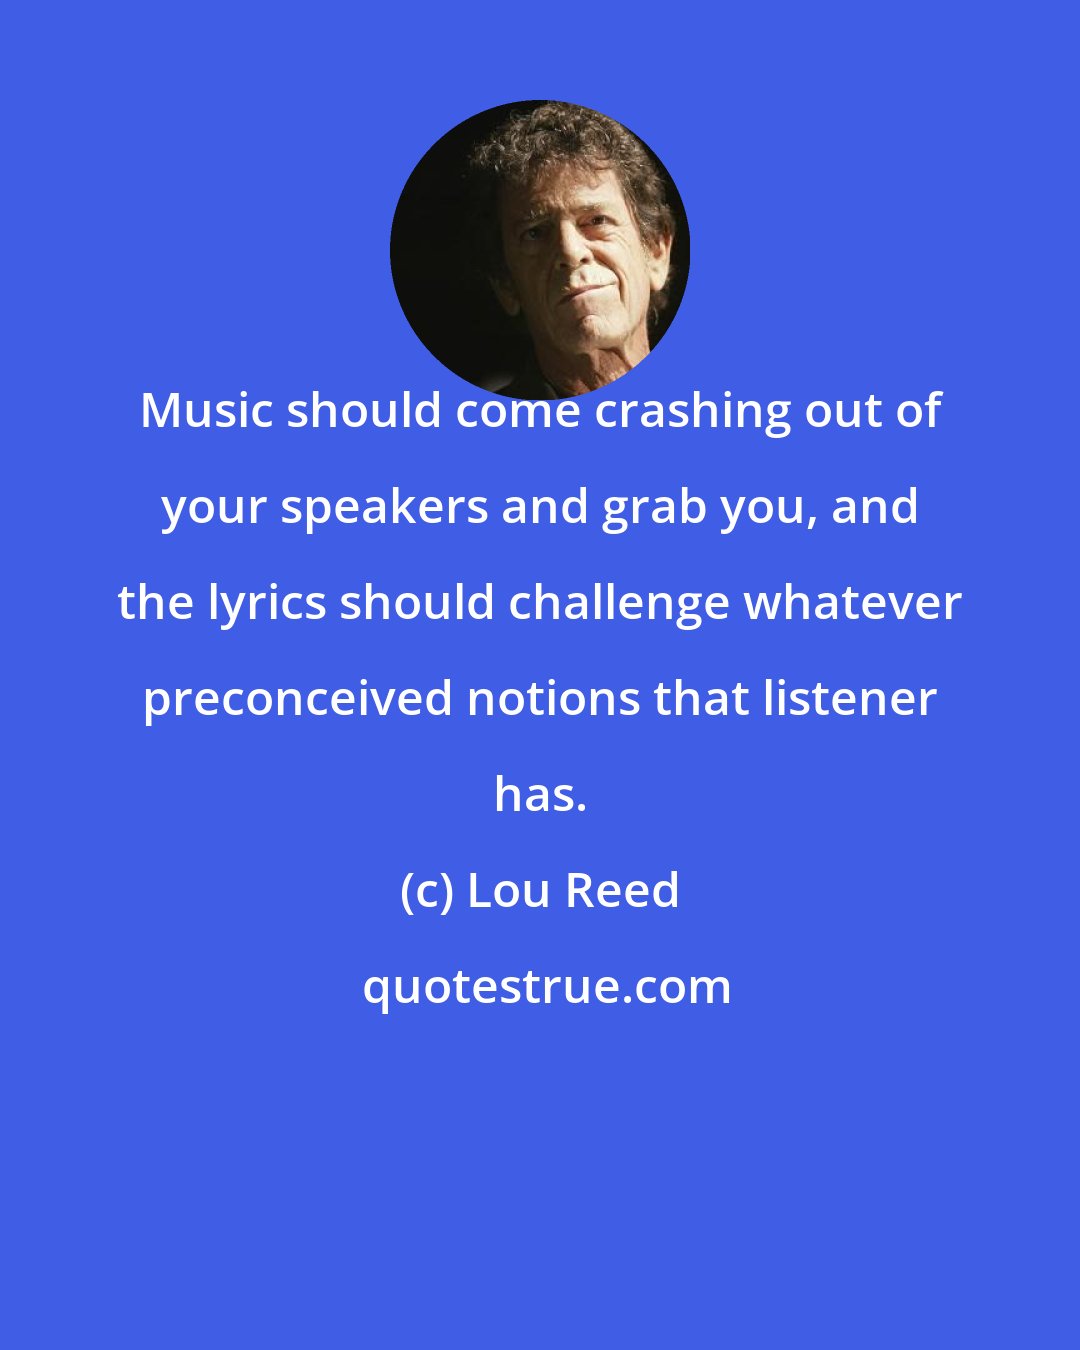 Lou Reed: Music should come crashing out of your speakers and grab you, and the lyrics should challenge whatever preconceived notions that listener has.